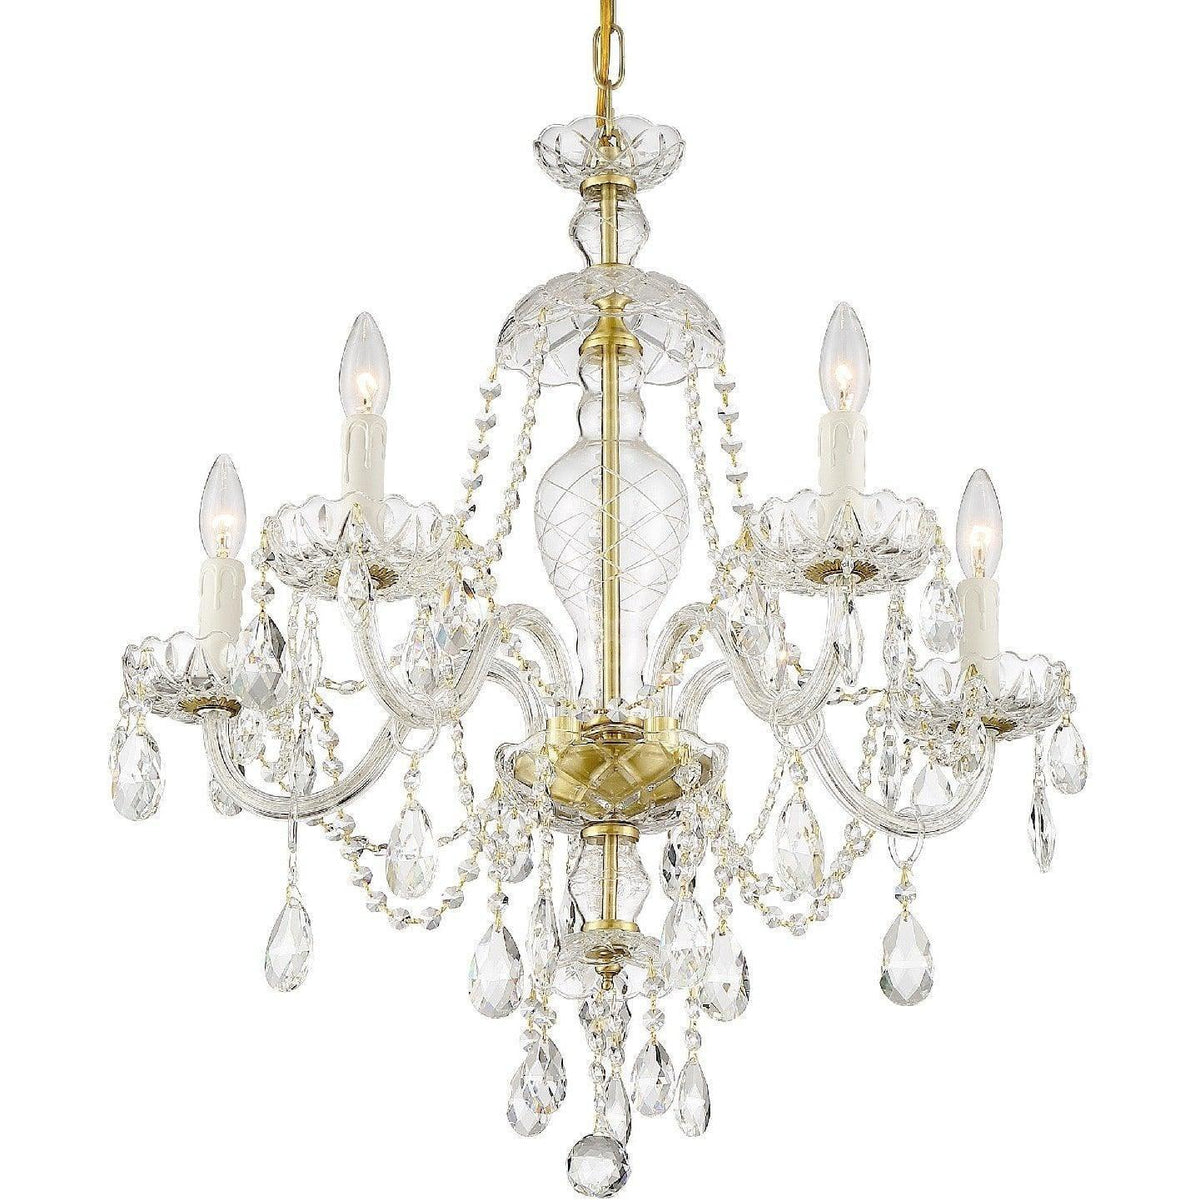 Crystorama - Candace Five Light Chandelier - CAN-A1305-PB-CL-MWP | Montreal Lighting & Hardware